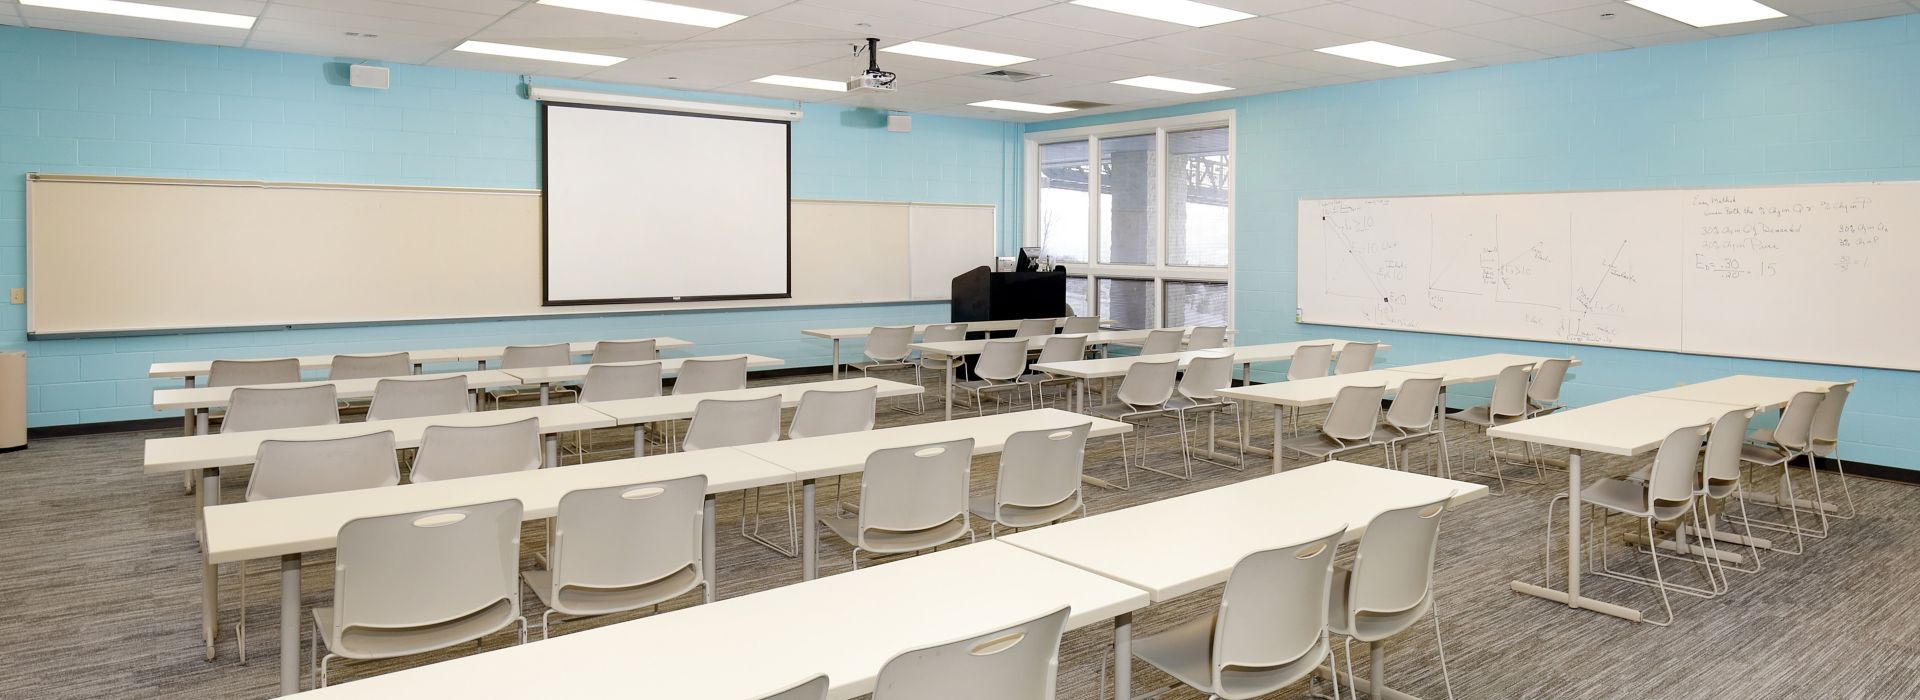 Interface Grooved carpet tile in training room with rows of white tables and chairs numéro d’image 1